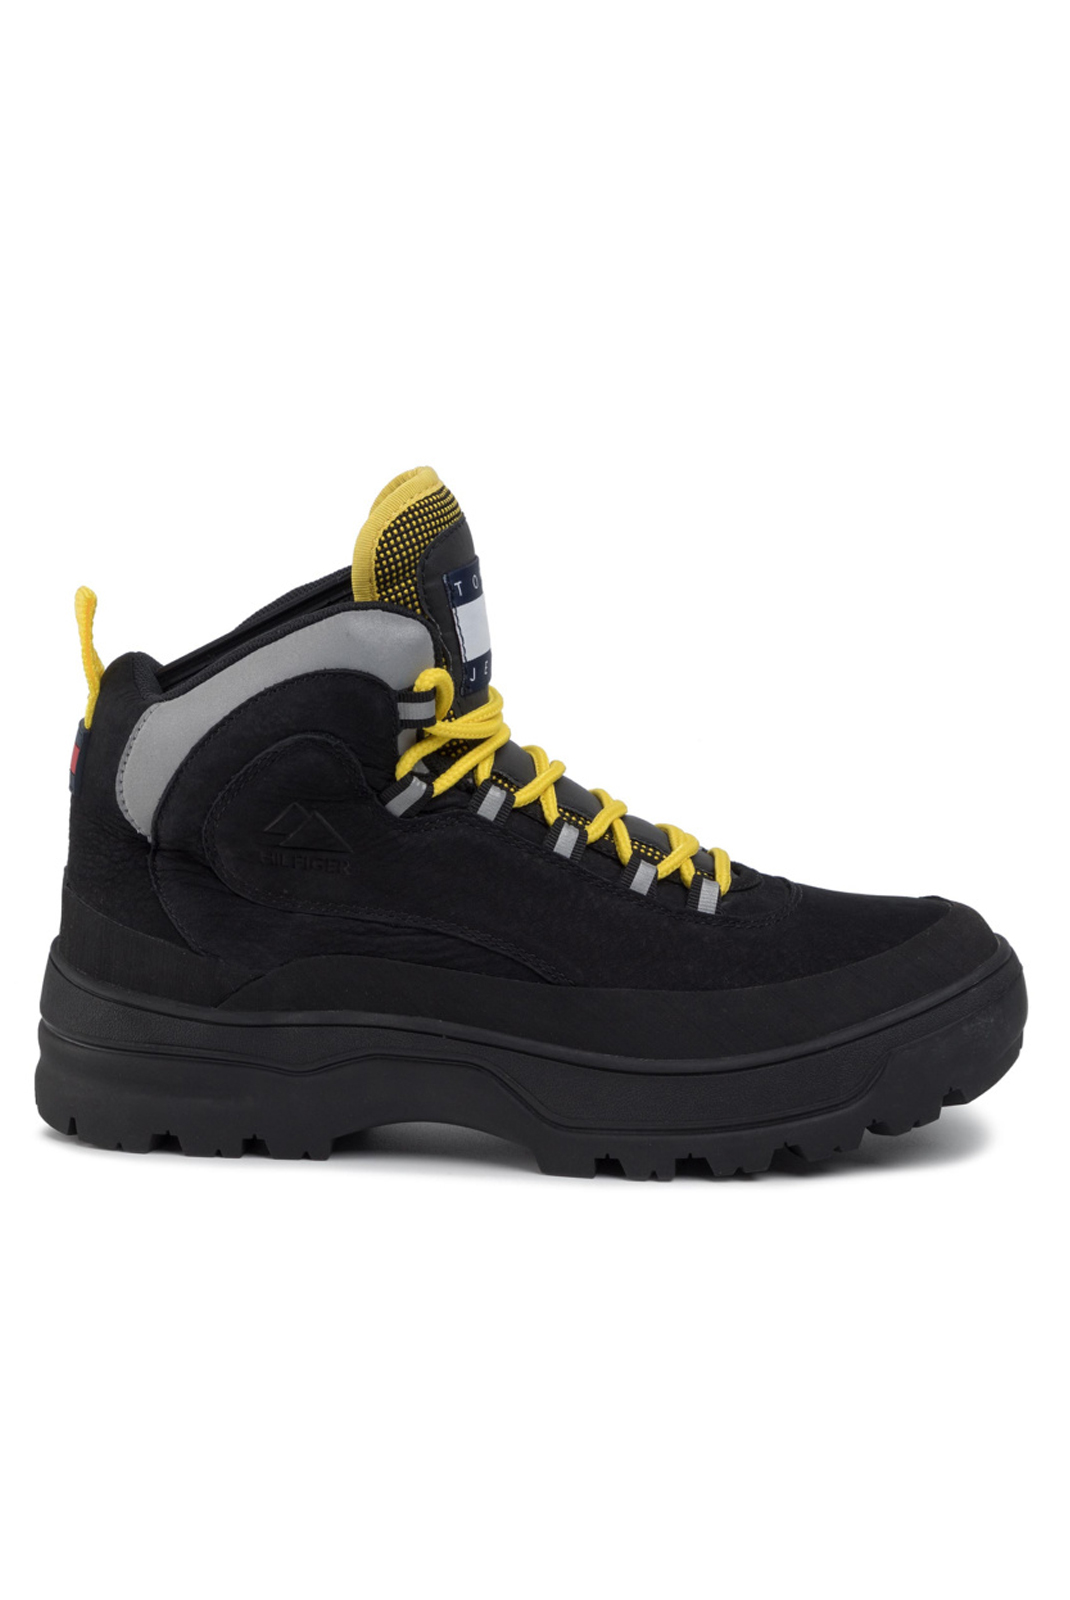 Tommy Jeans Hilfiger Boots Chaussure Noir Expedition